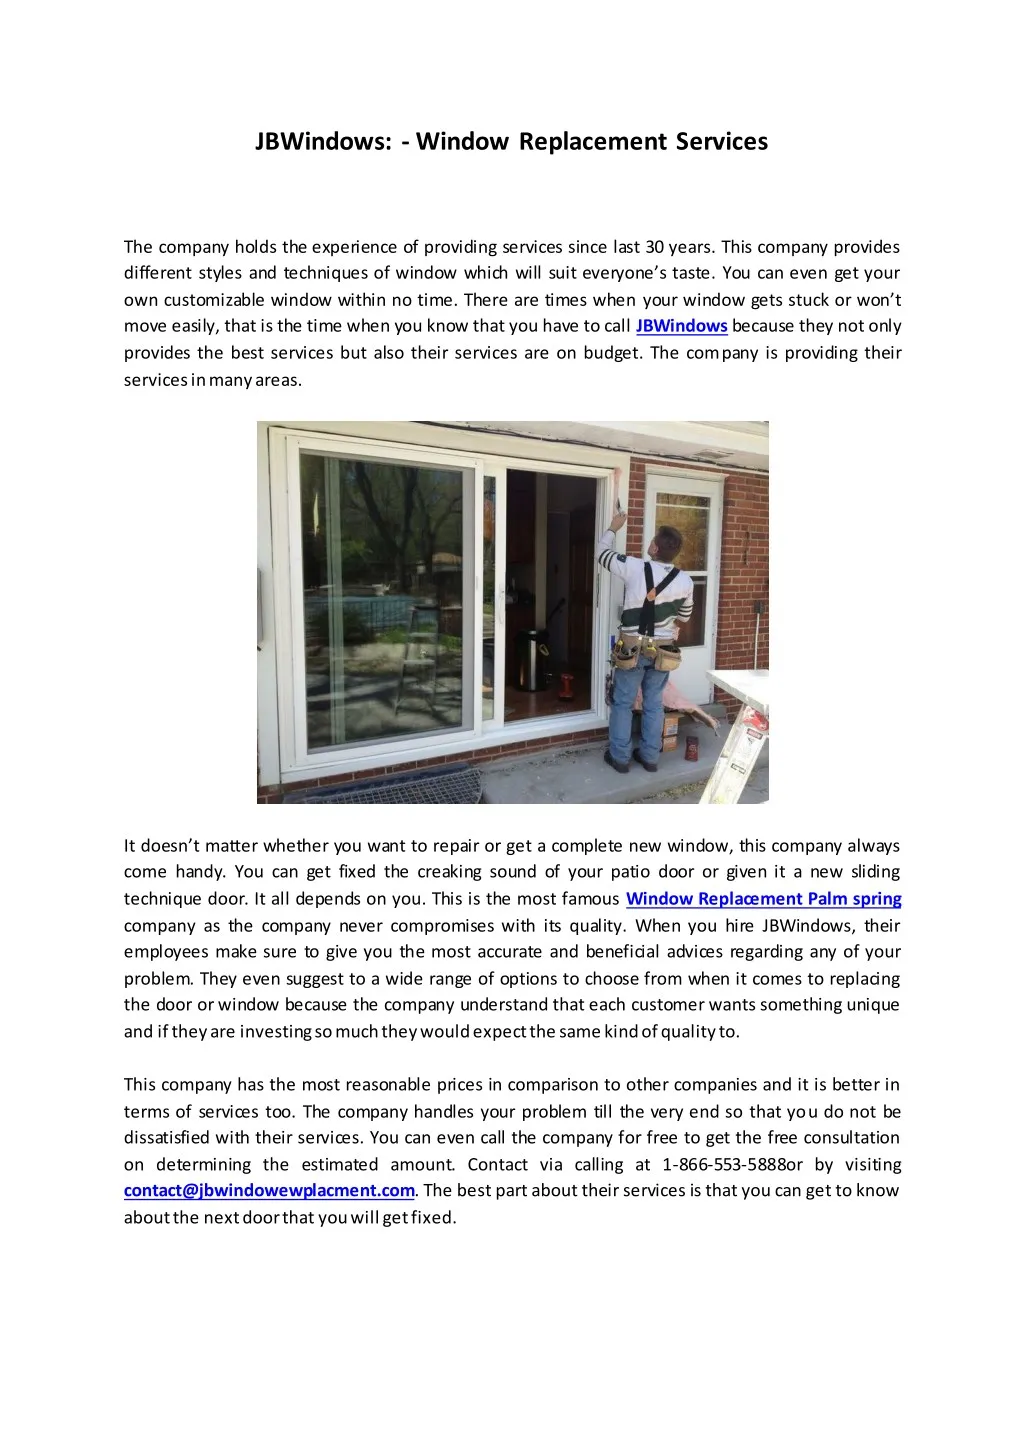 jbwindows window replacement services